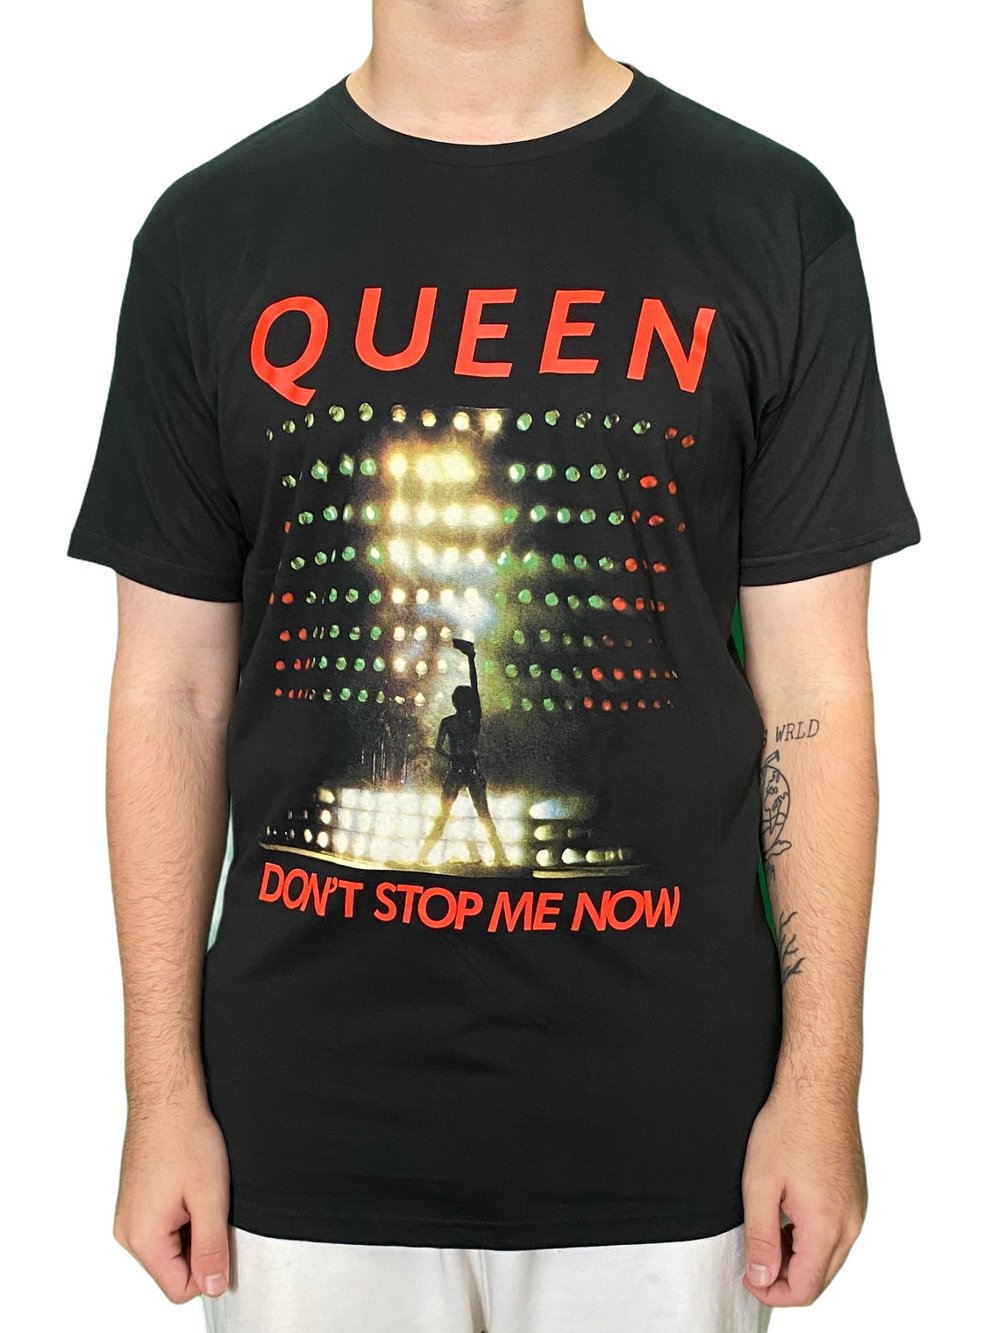 Queen - Don't Stop Me Now LIVE Unisex Official T Shirt Various Sizes NEW